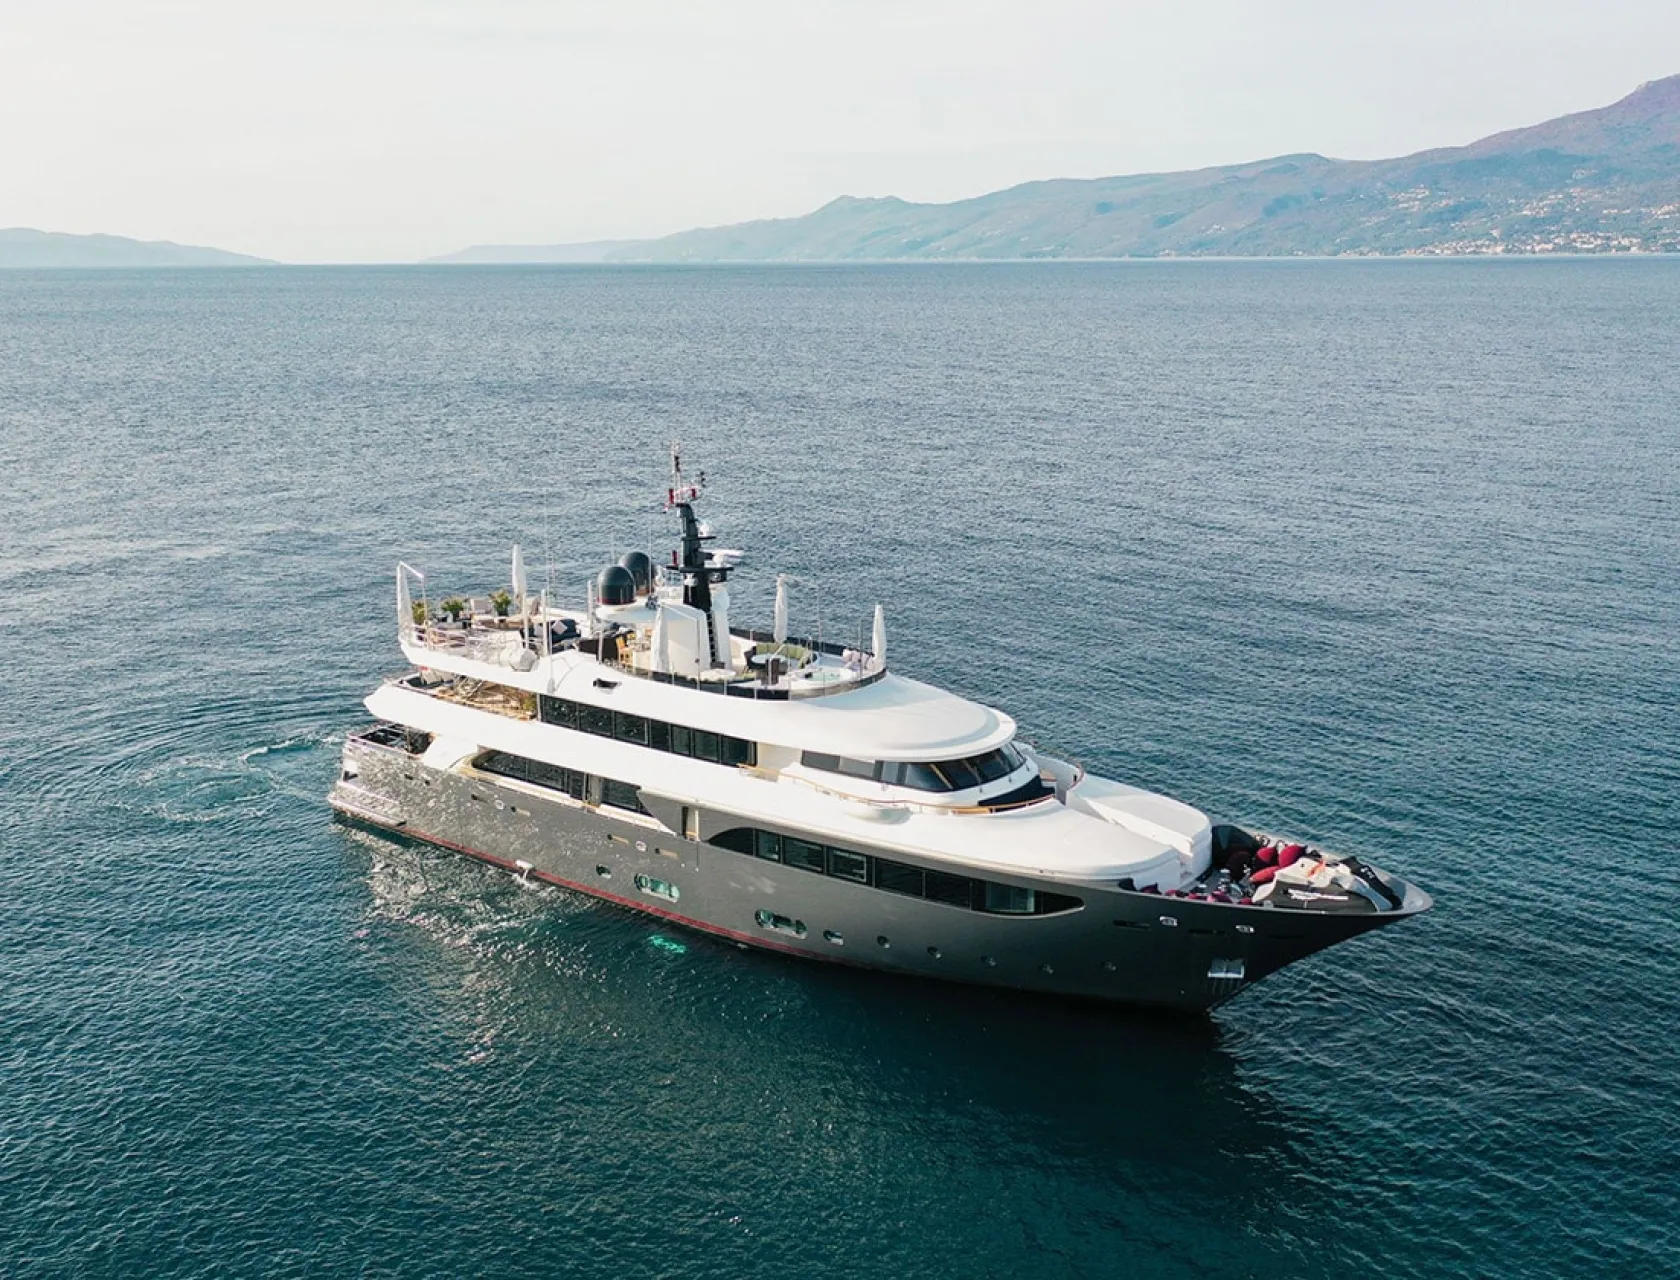 From the largest yachts to exclusive charters